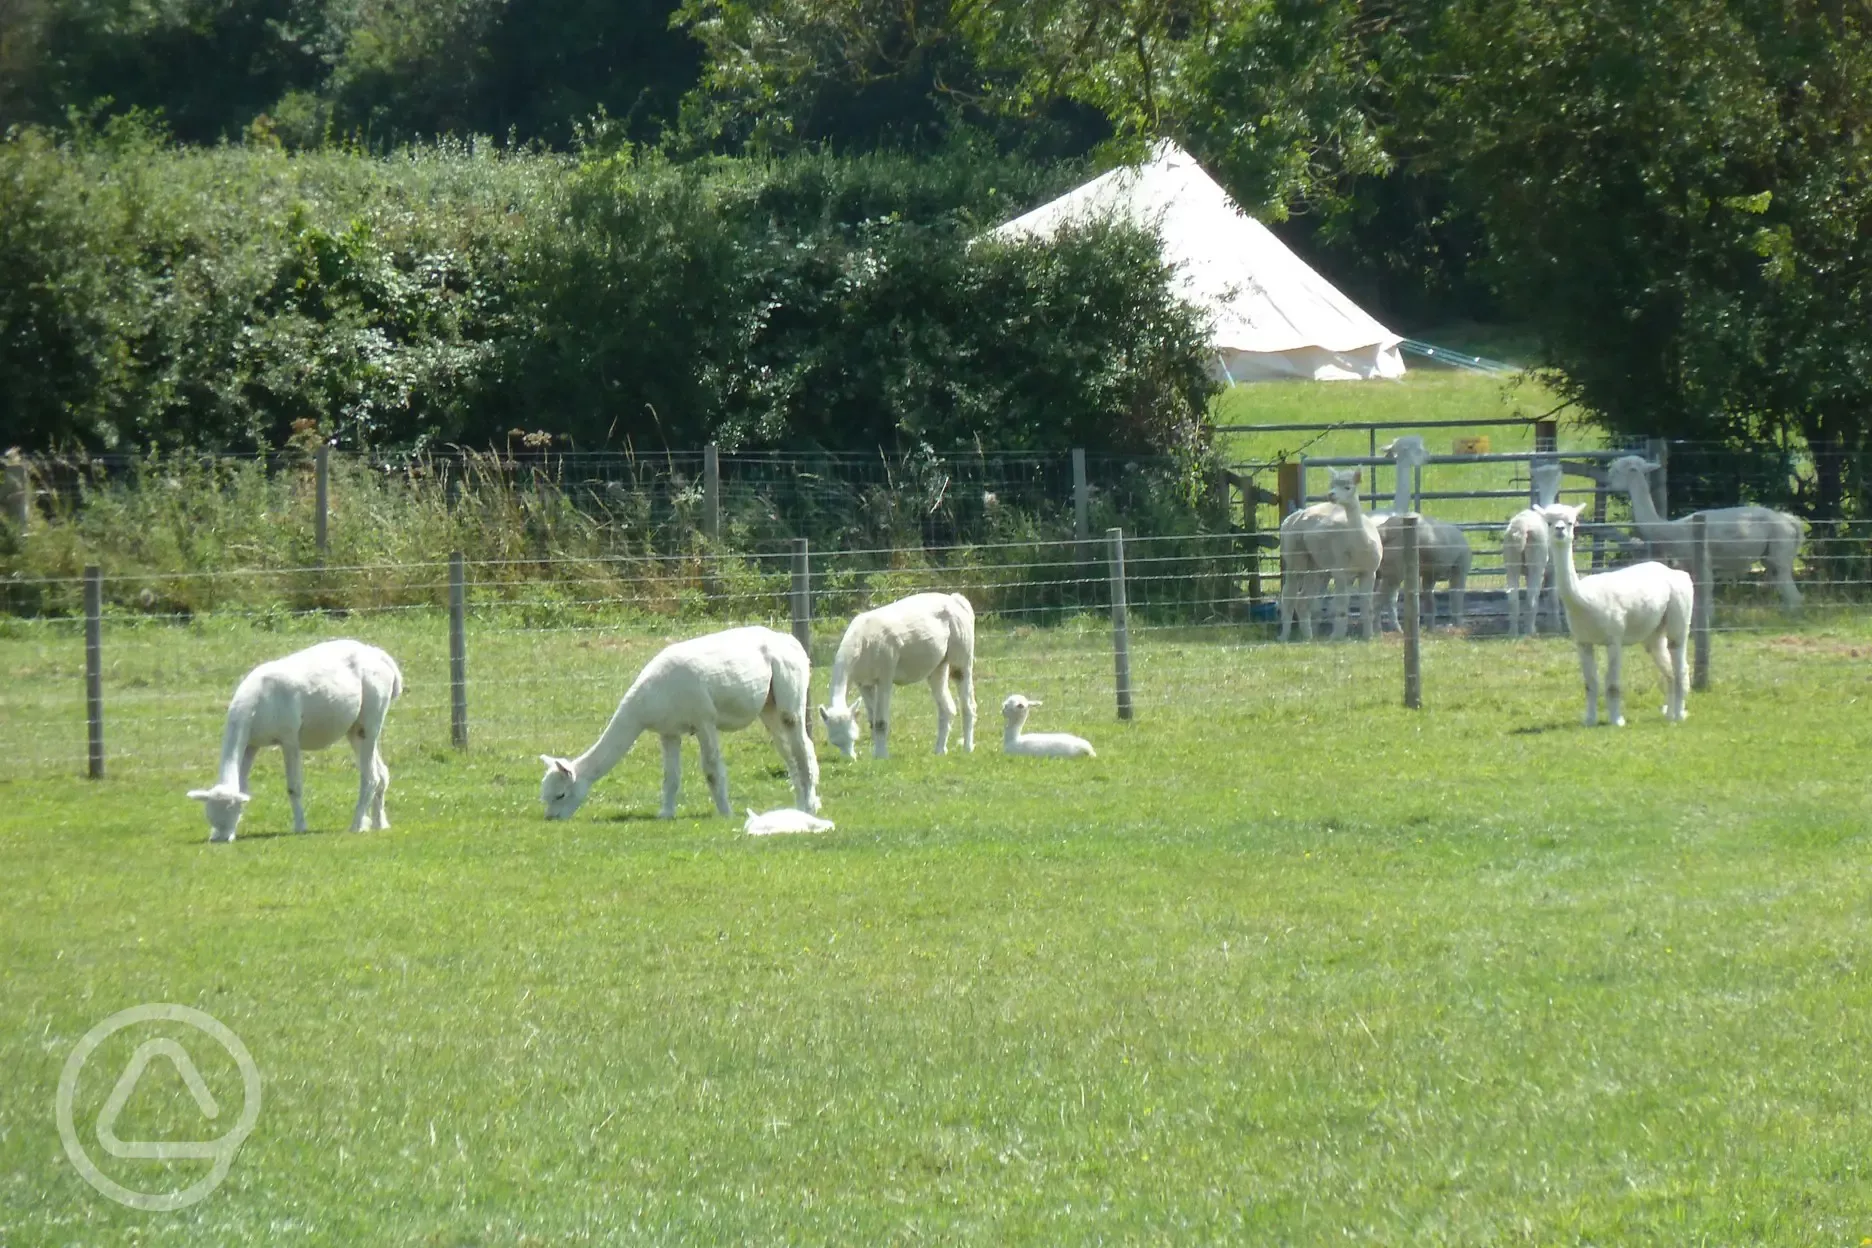 Wiltshire Glamping in a meadow among the Alpacas